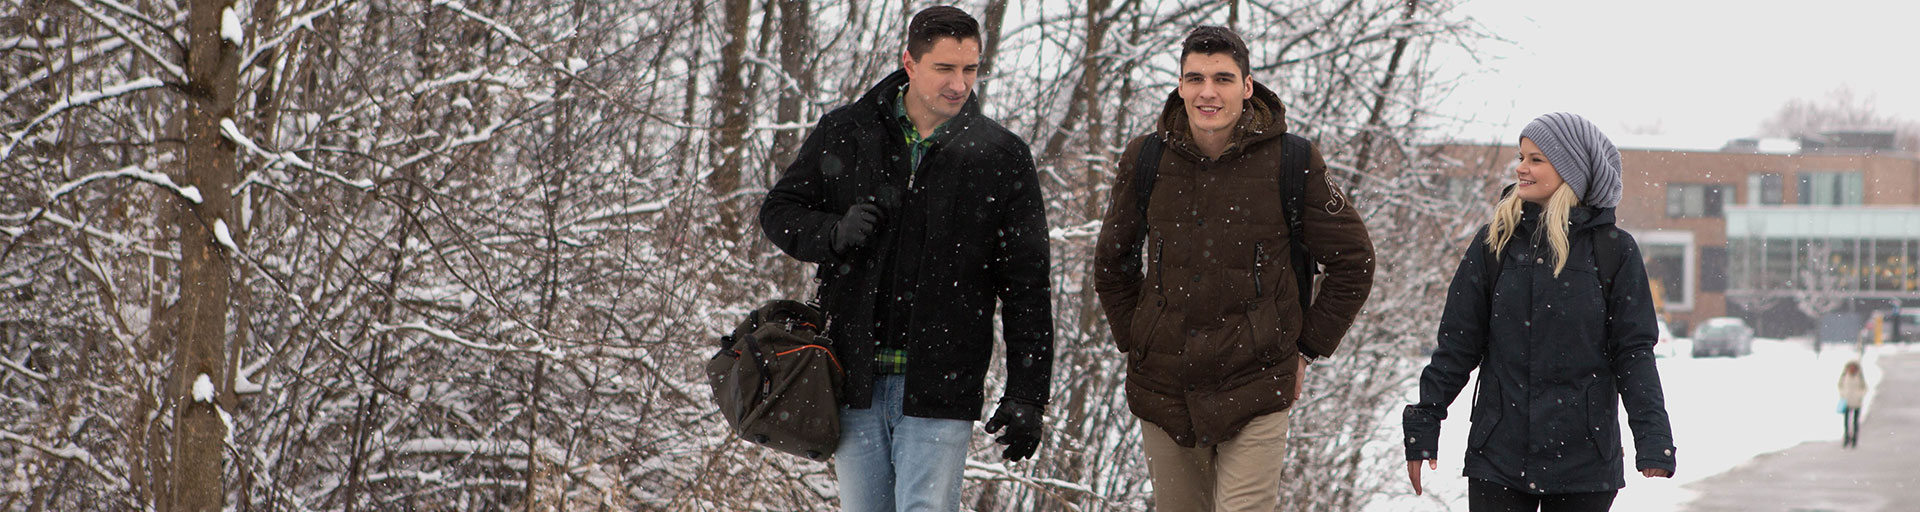 two males and a female walking outside in the winter